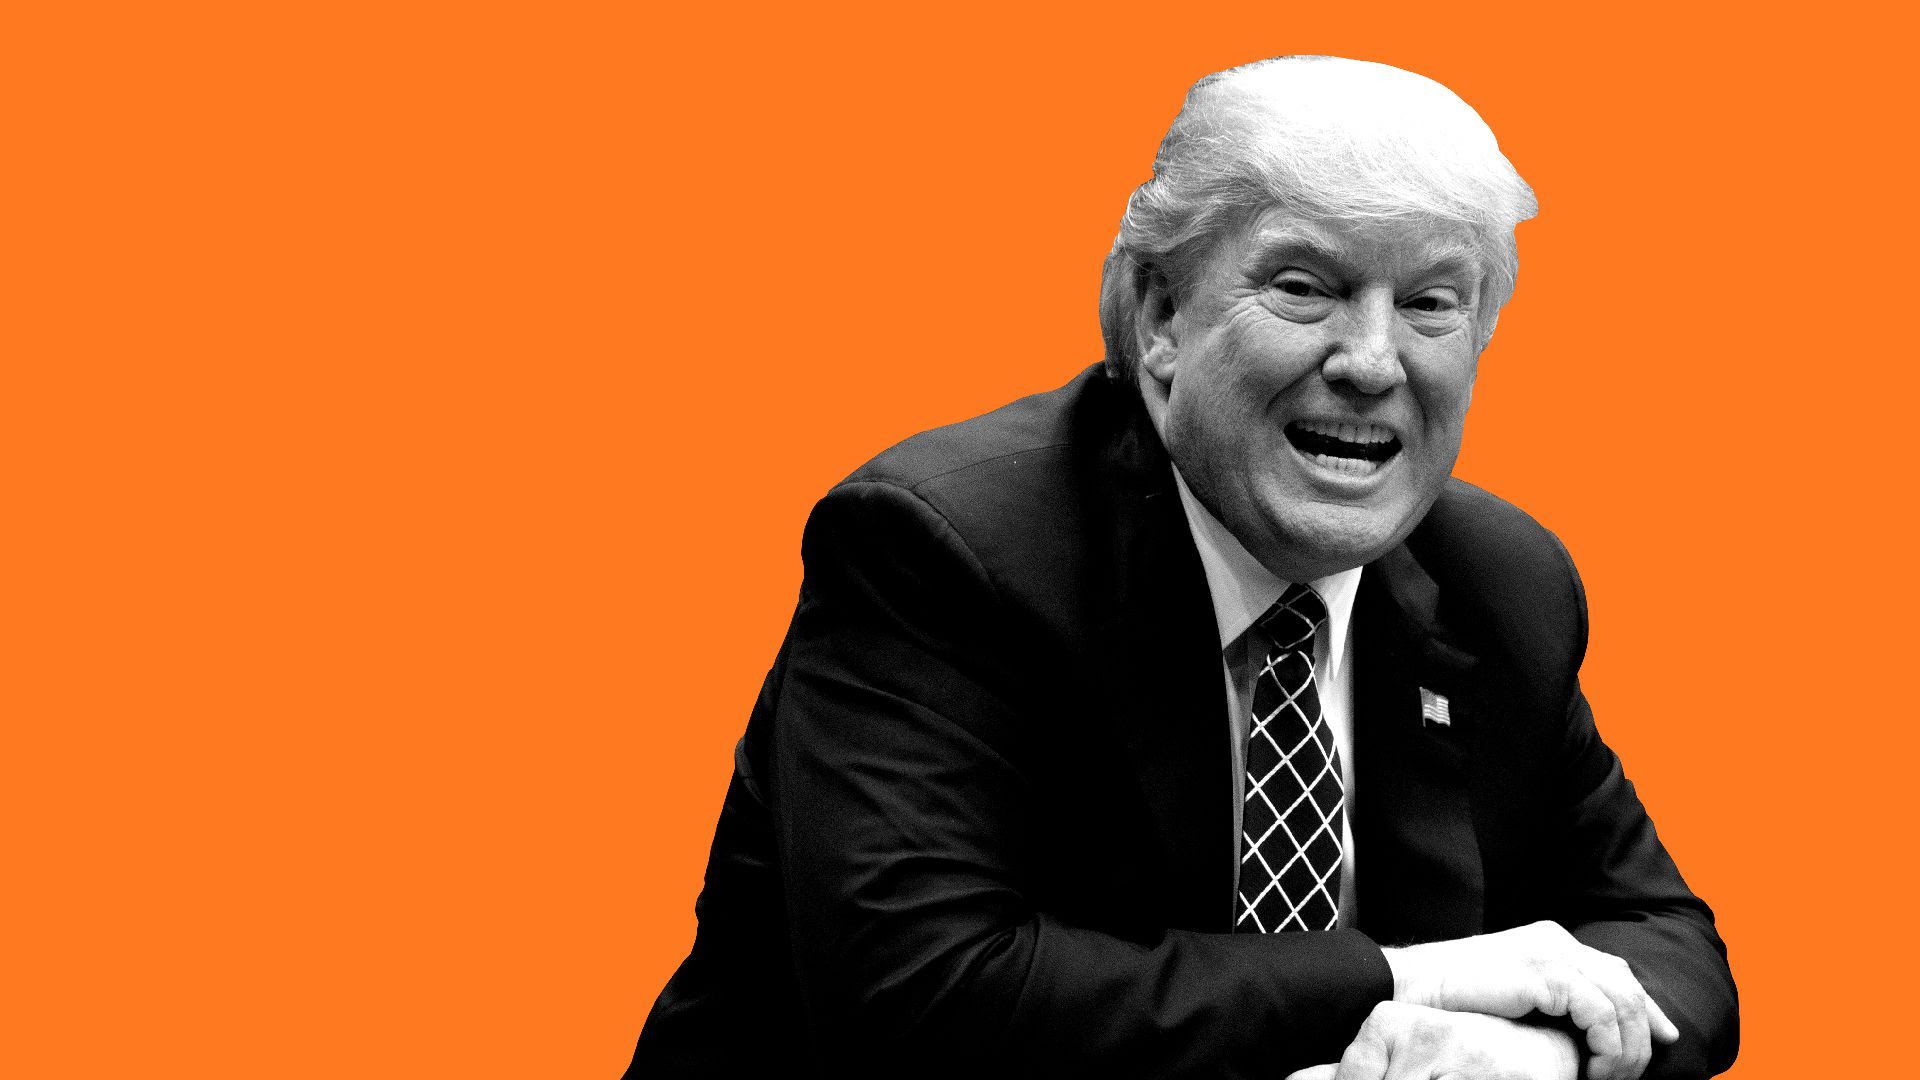 Illustration of Trump leaning over and speaking at a table (in black and white) with an orange background